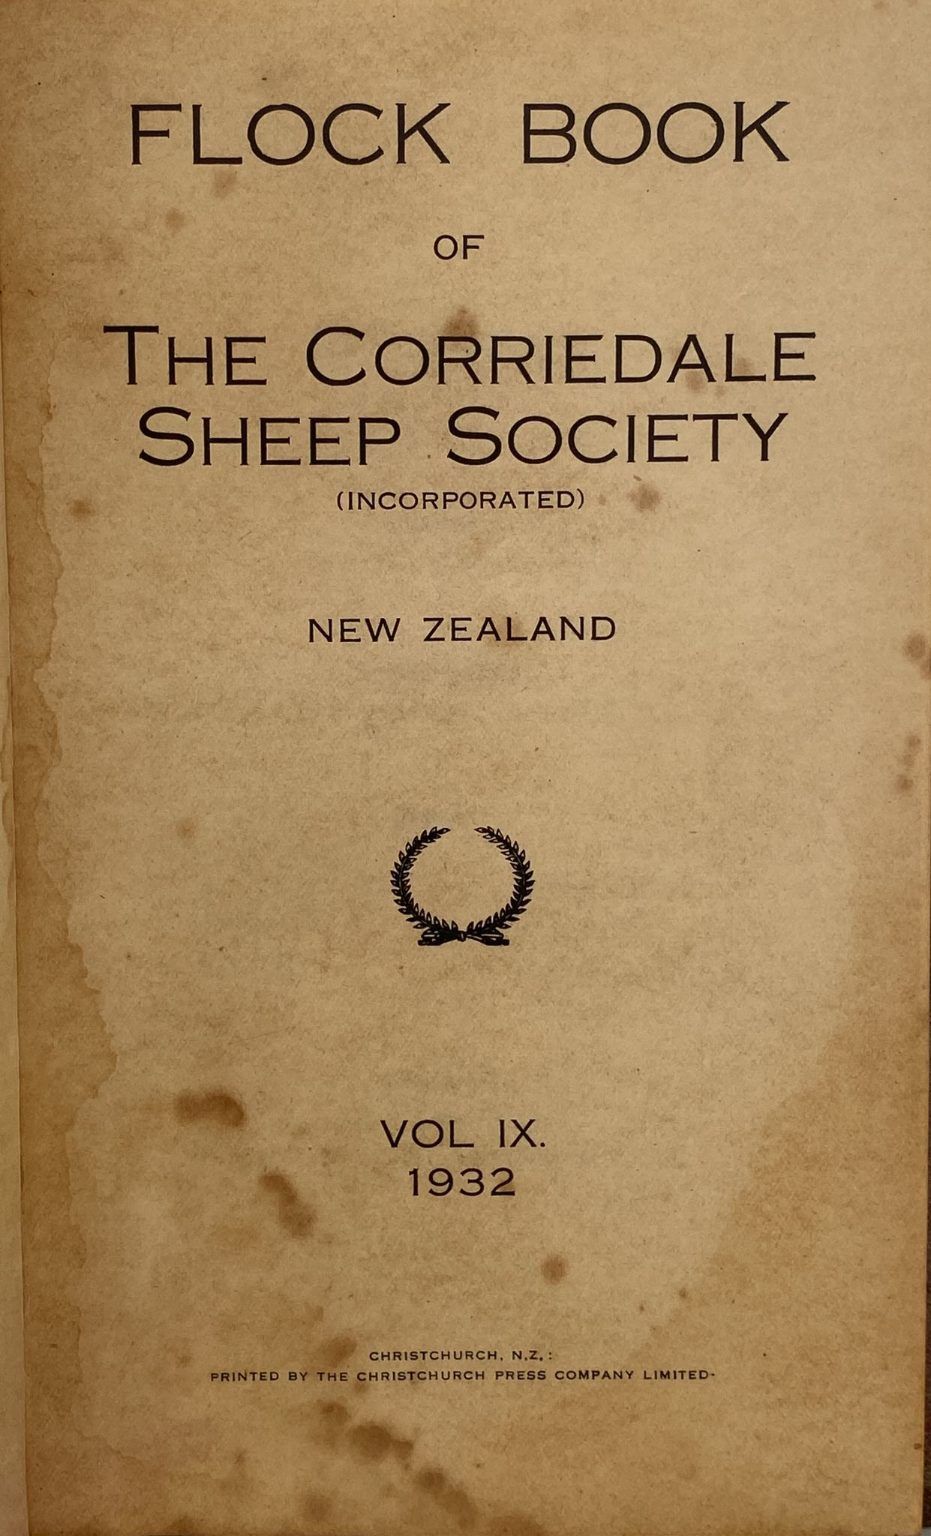 FLOCK BOOK: Of The Corriedale Sheep Society (Inc) New Zealand, Vol. 9, 1937